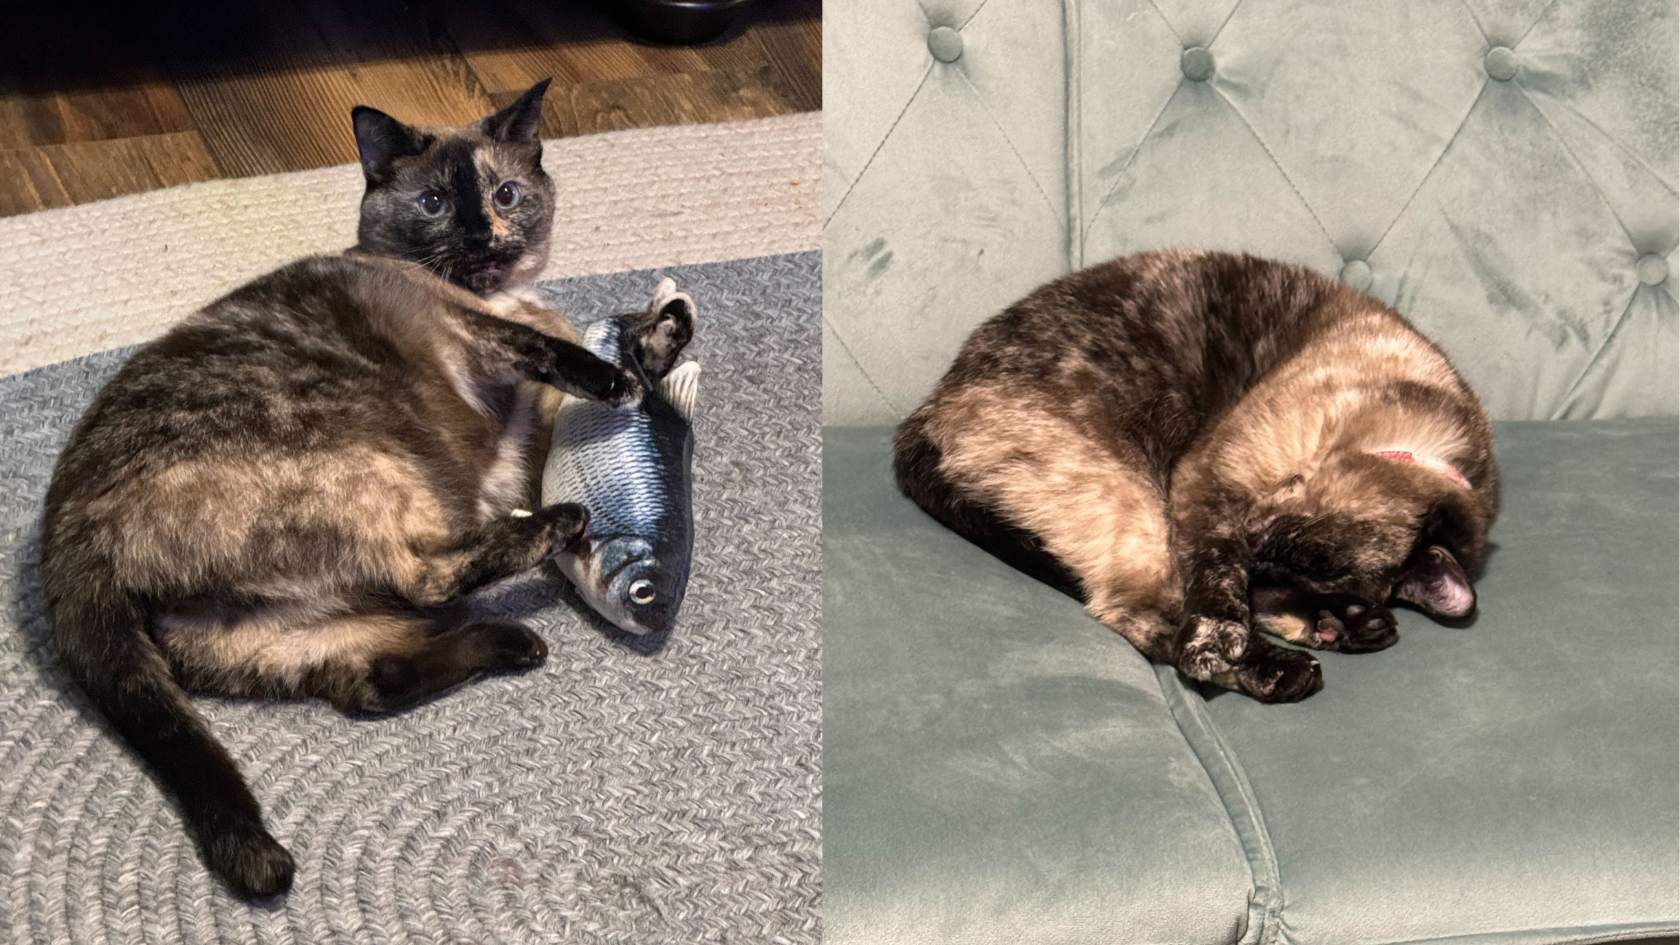 Two images of the same tortoiseshell cat, one laying on its side with a fish toy and the other of it curled up sleeping